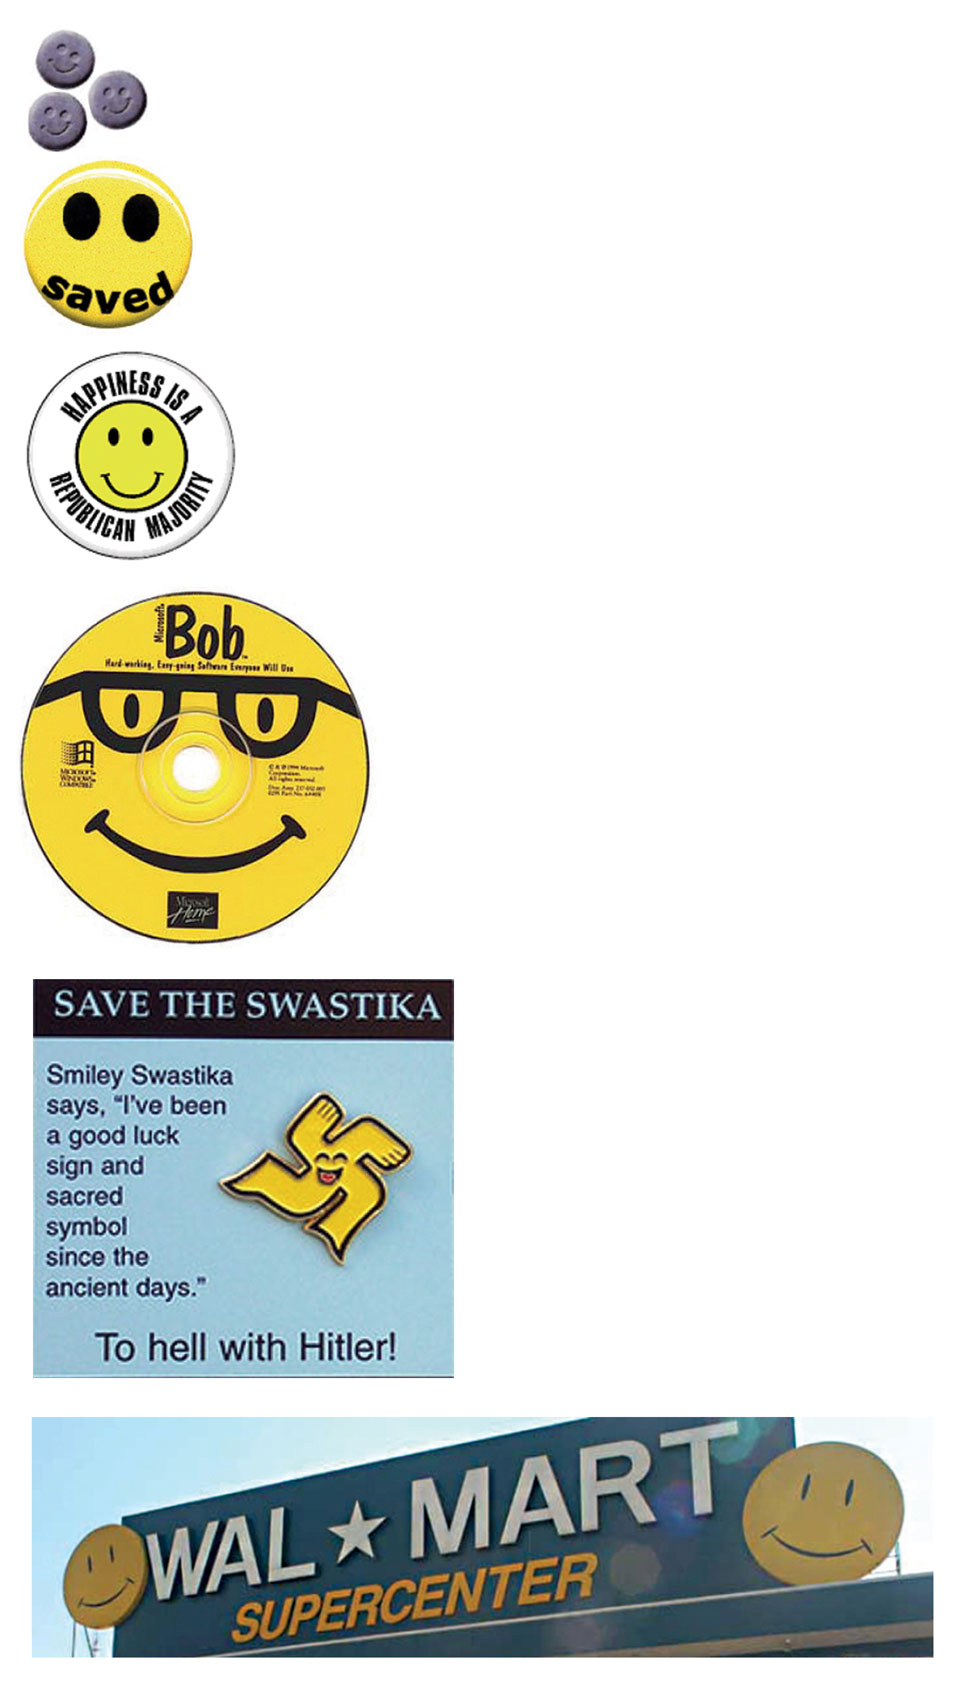 An image depicting a range of smiley face objects from smiley Ecstasy pills to a smiley Walmart sign.